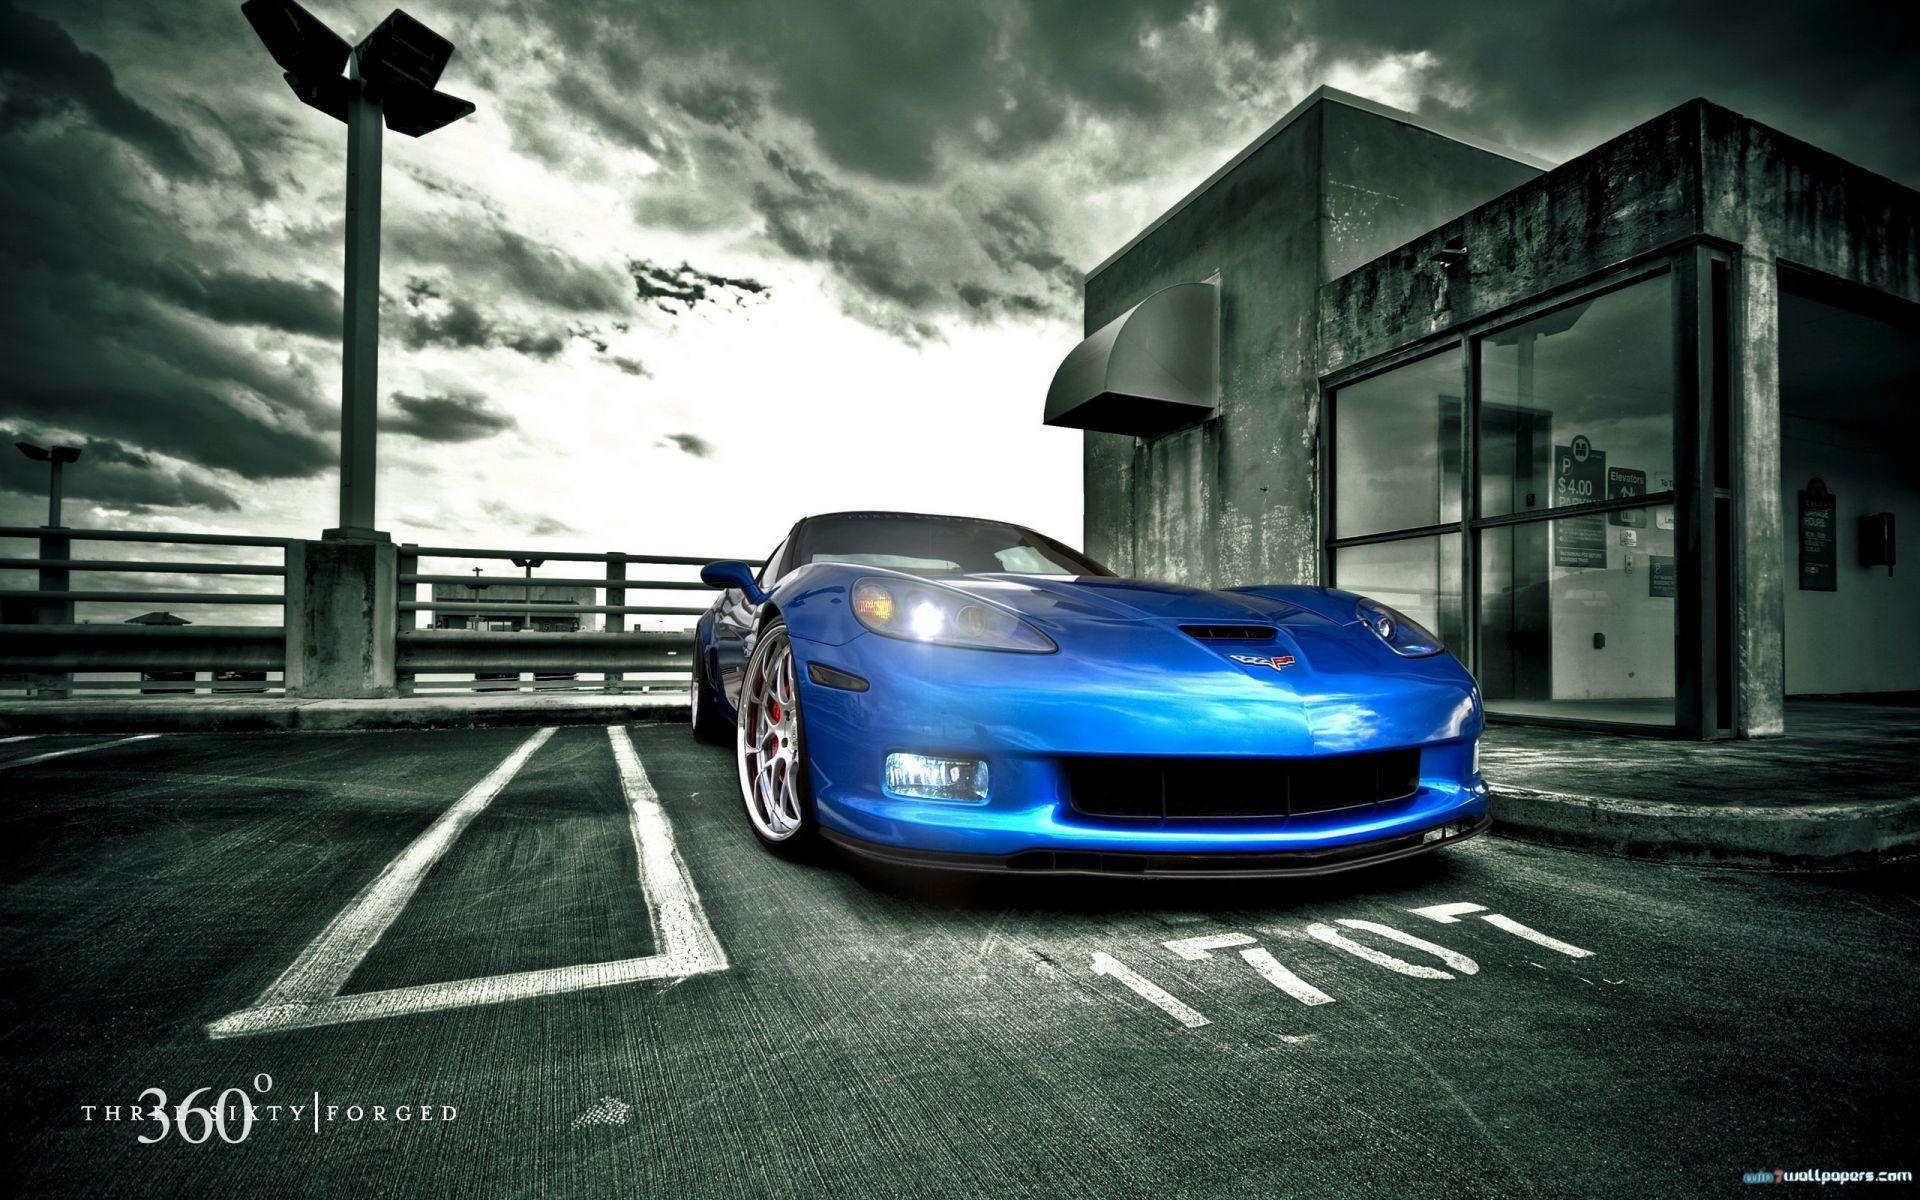 Free Download Nice Blue Sports Car Wallpaper in 1920x1200 resolutions